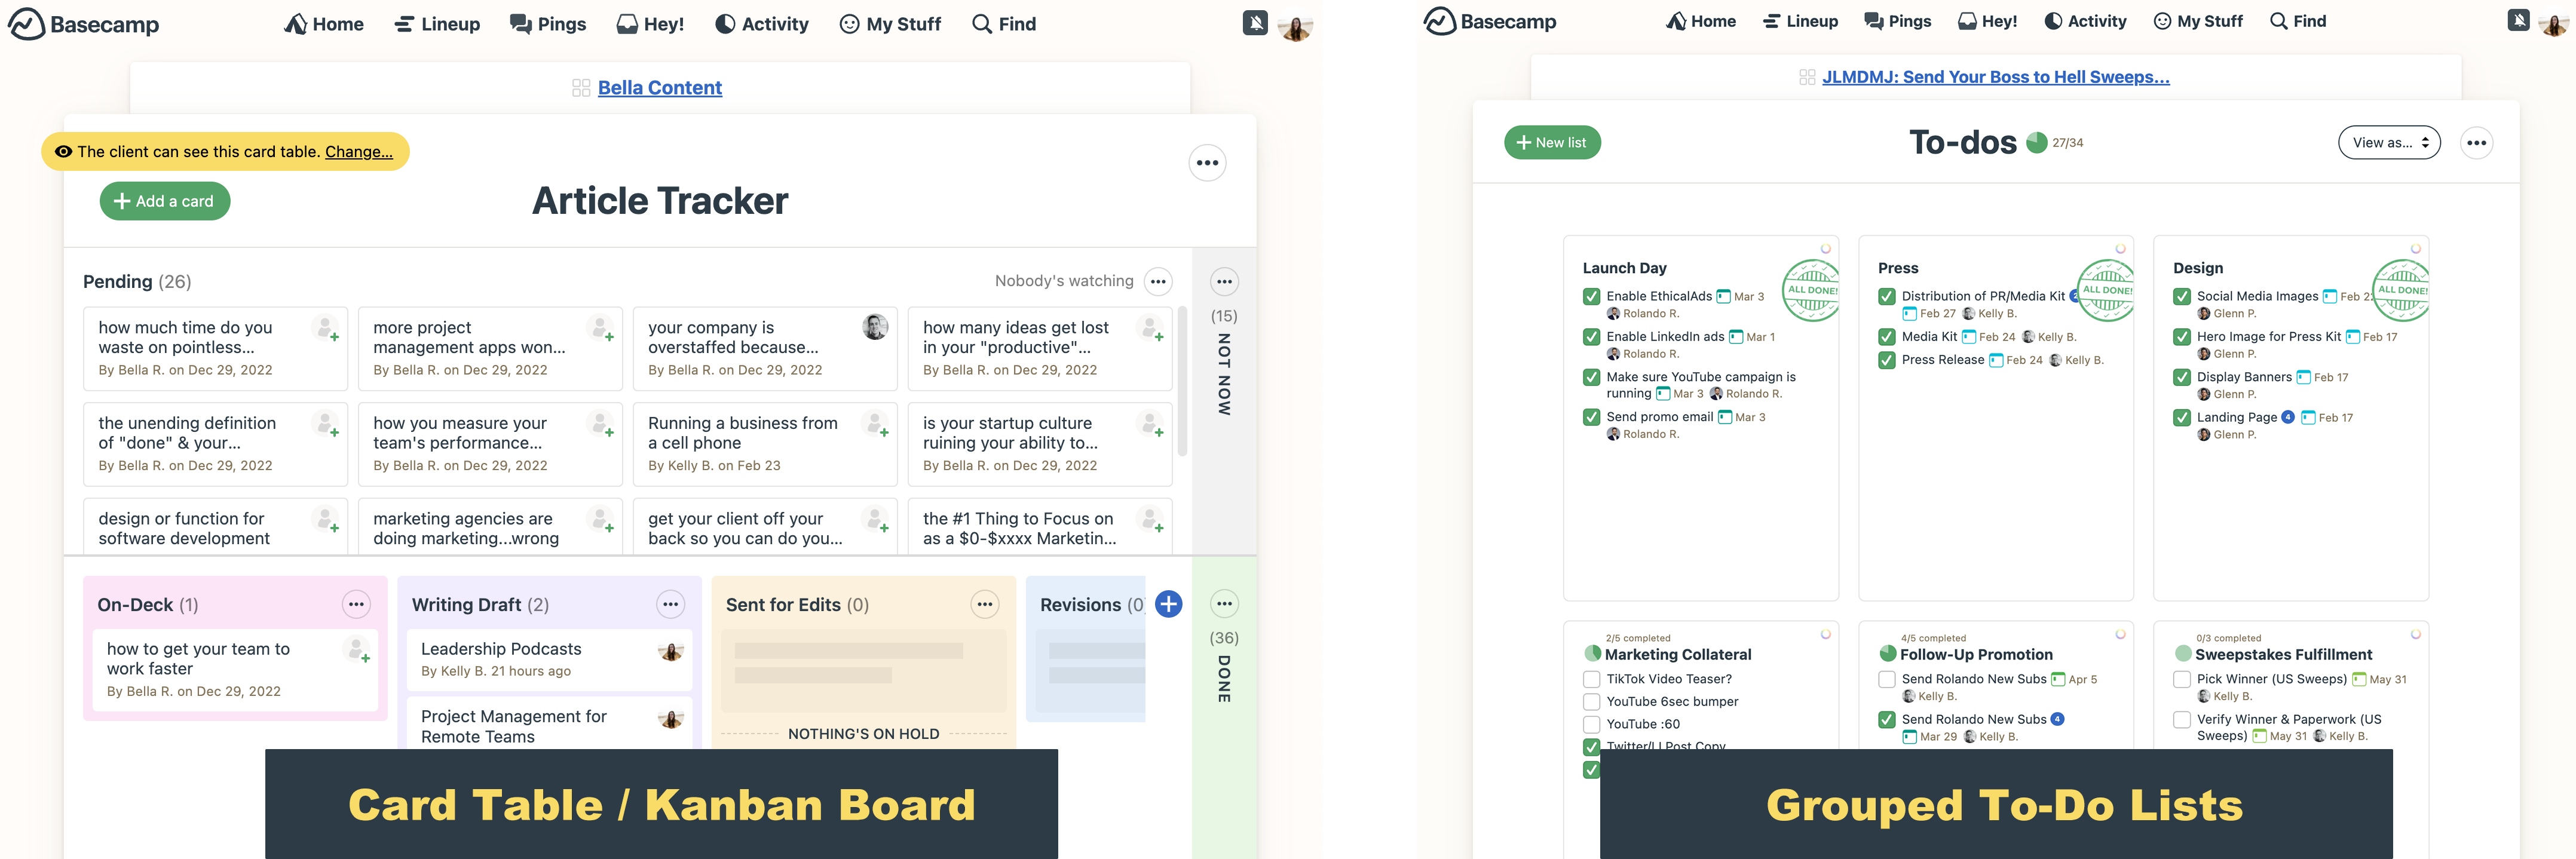 Comparing the carb table/kanban board style structure to the to-do list format inside Basecamp's project management app.